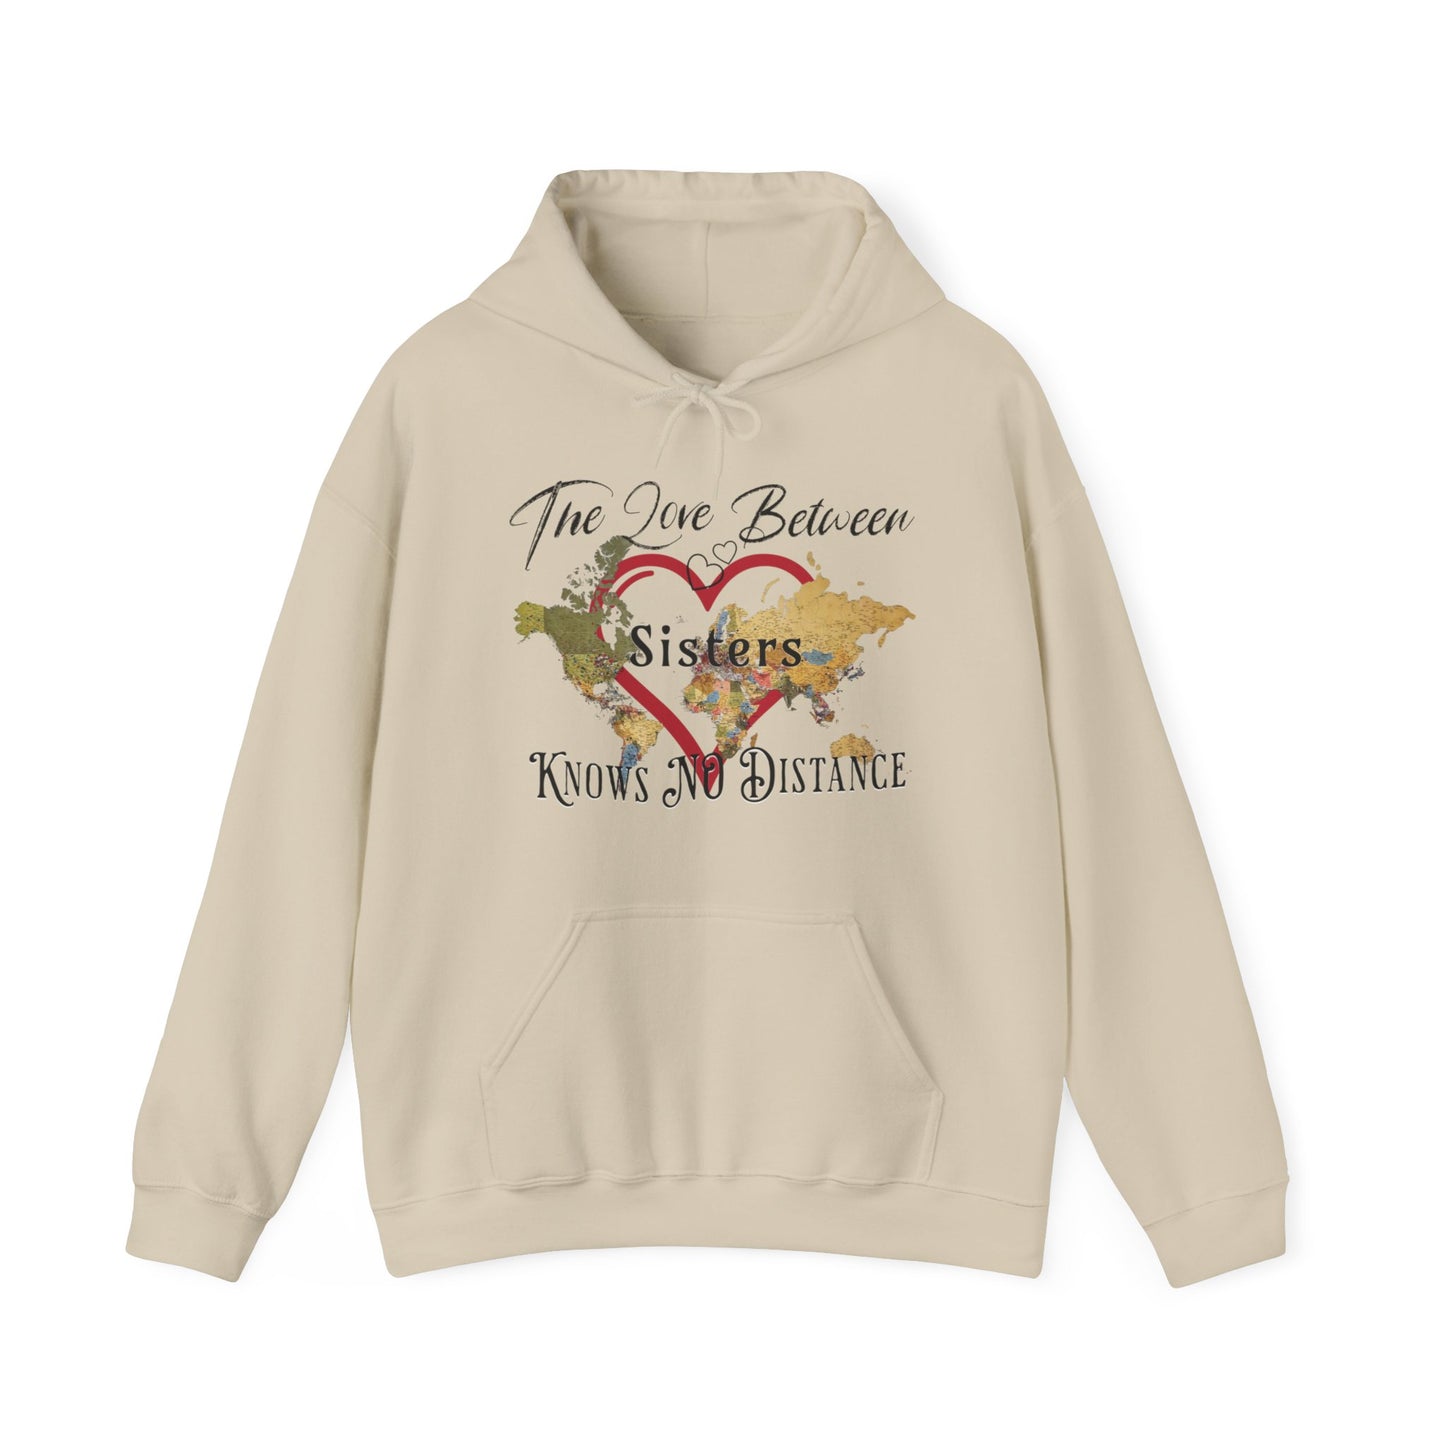 The love between sisters knows no distance - Unisex Heavy Blend™ Hooded Sweatshirt